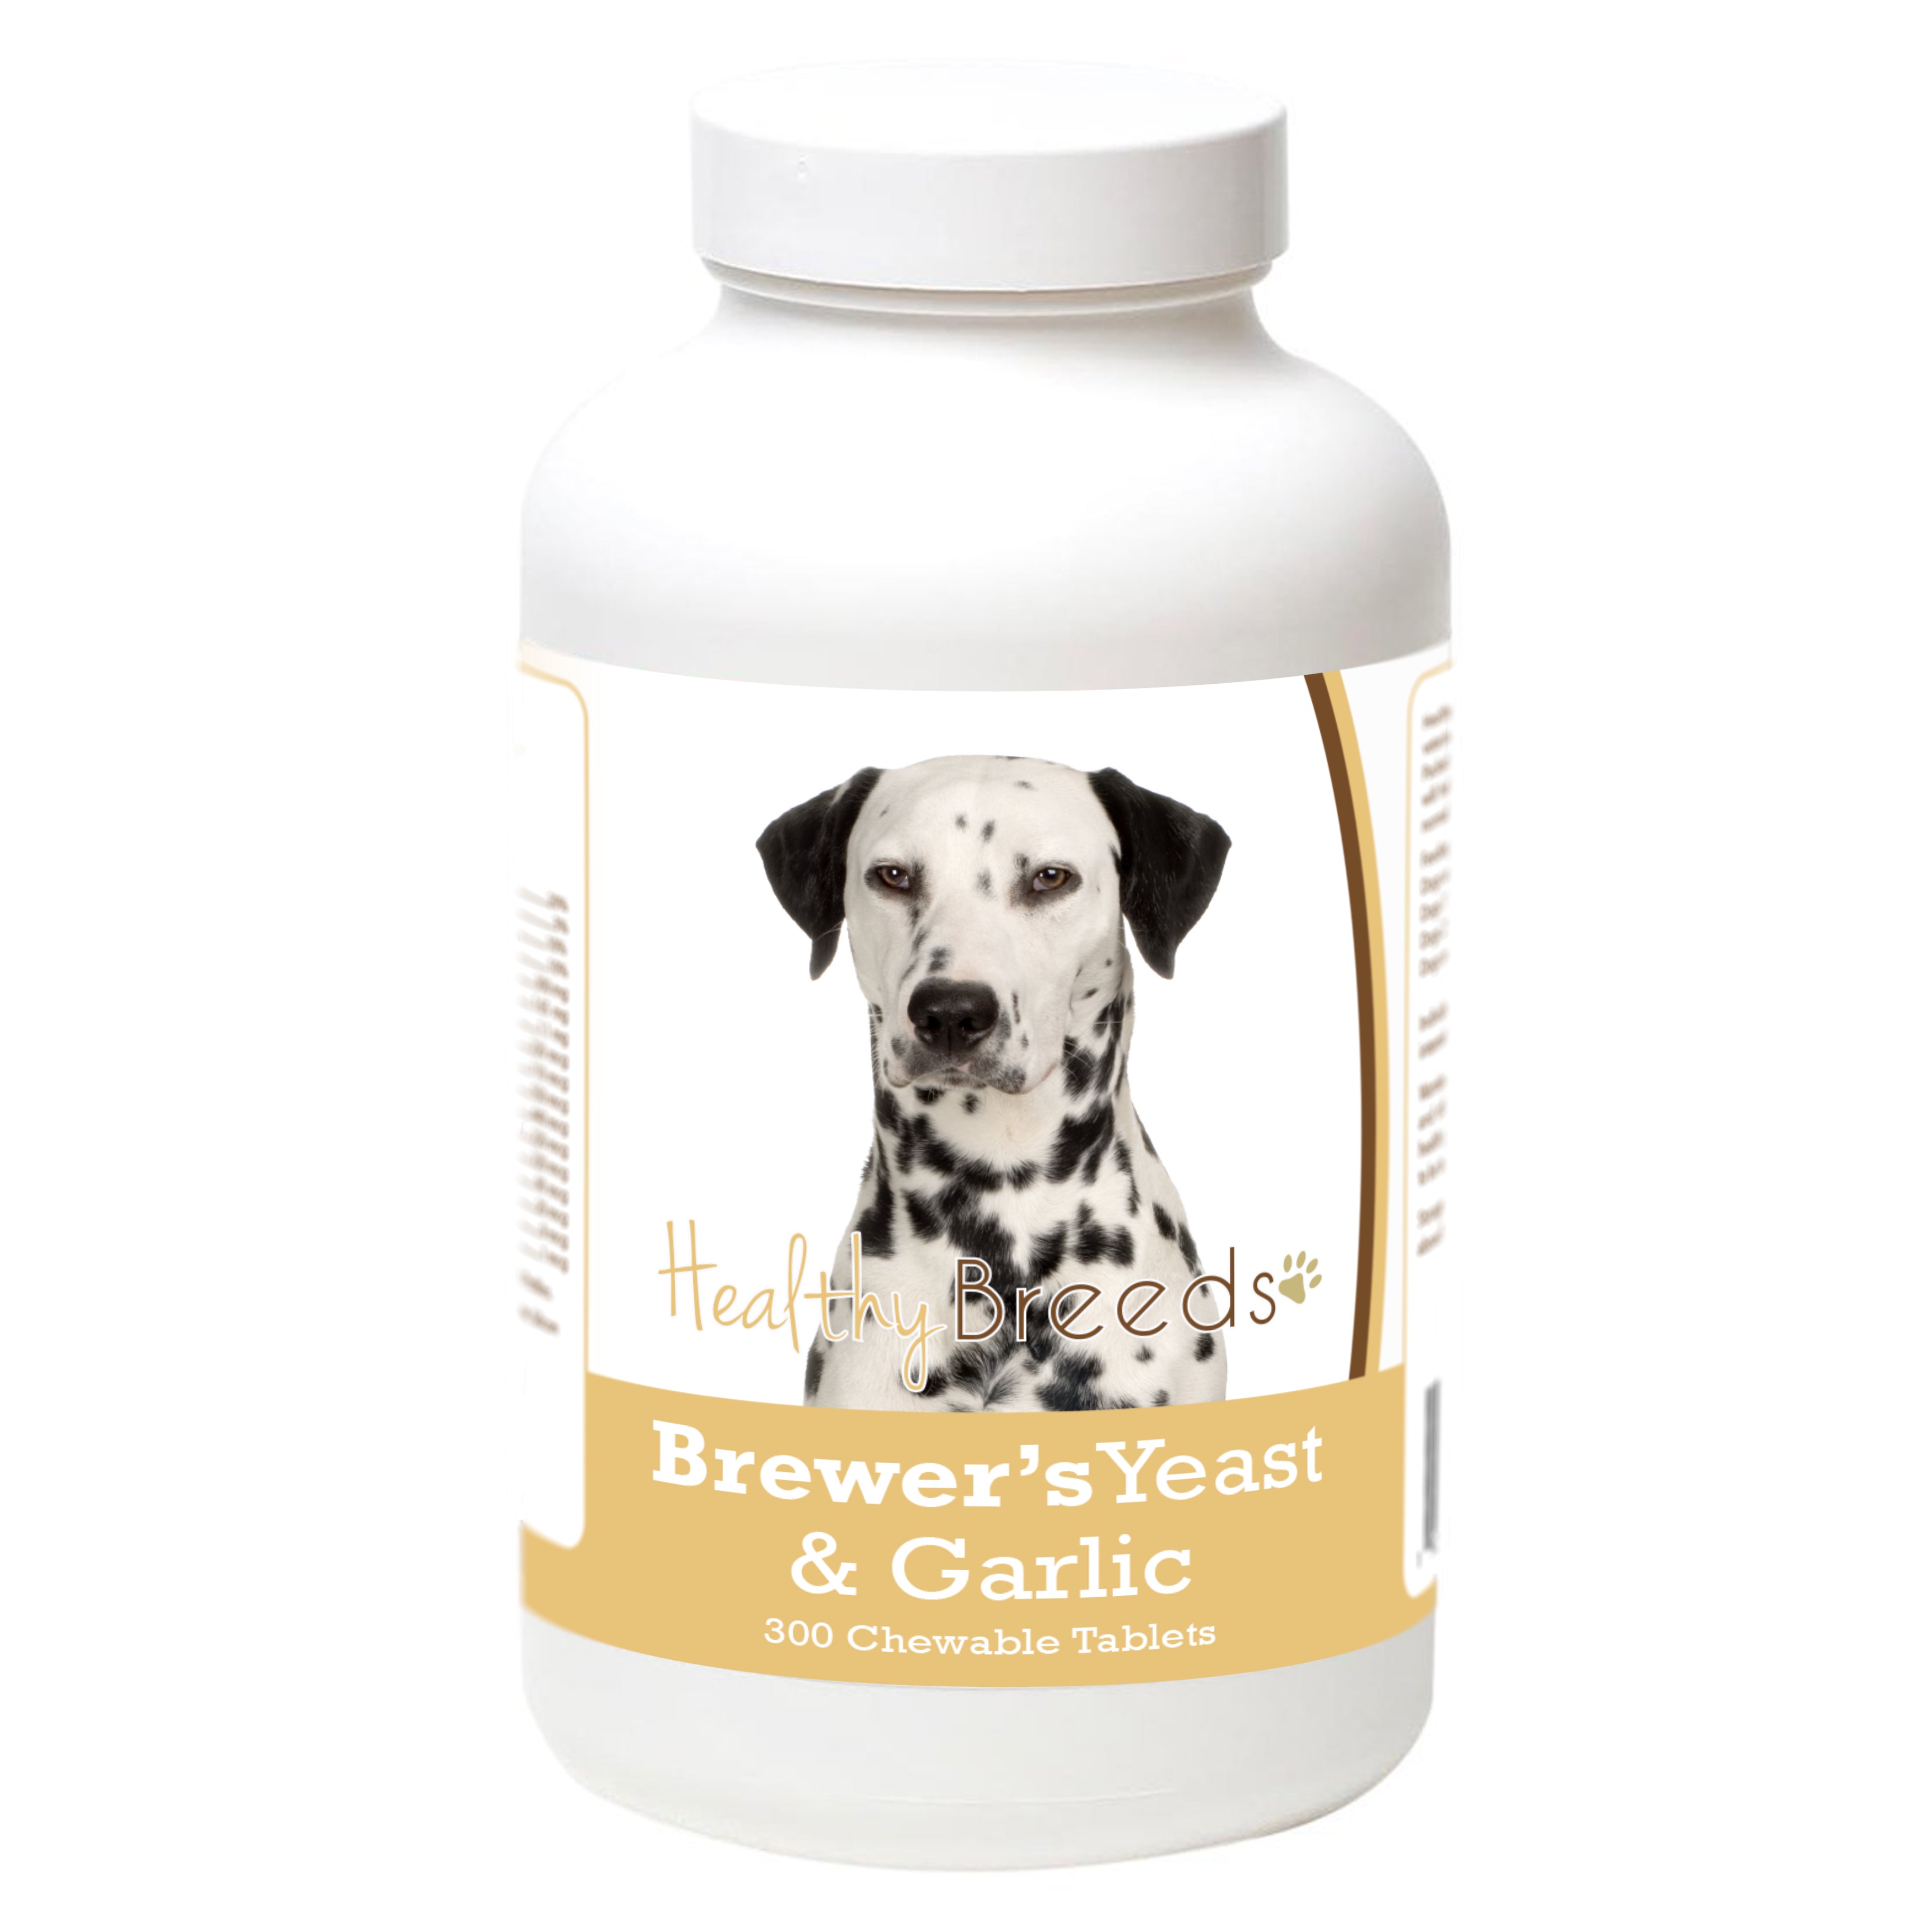 Dalmatian Brewers Yeast Tablets 300 Count